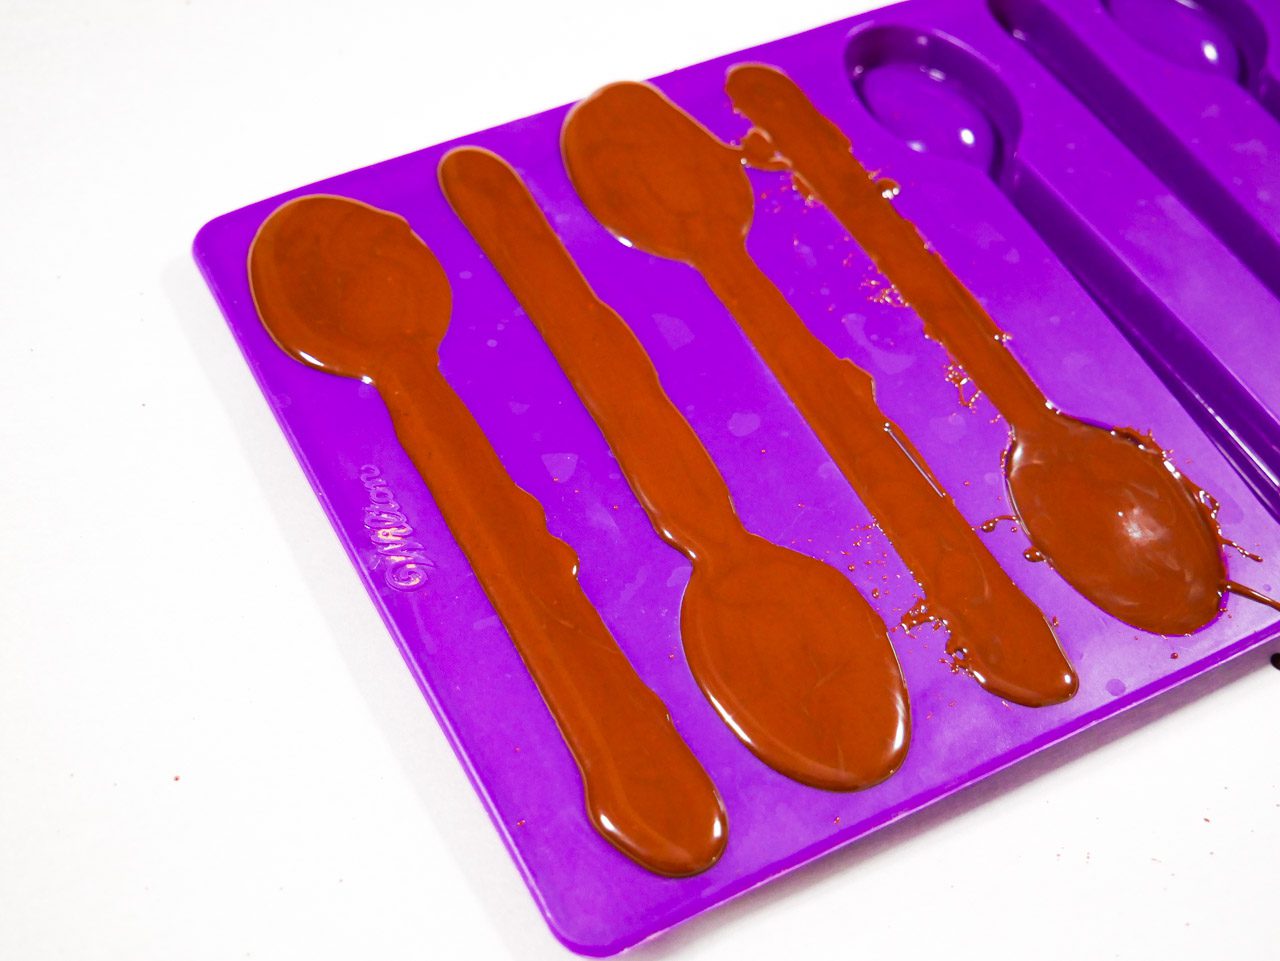 Piped in chocolate in spoon molds 